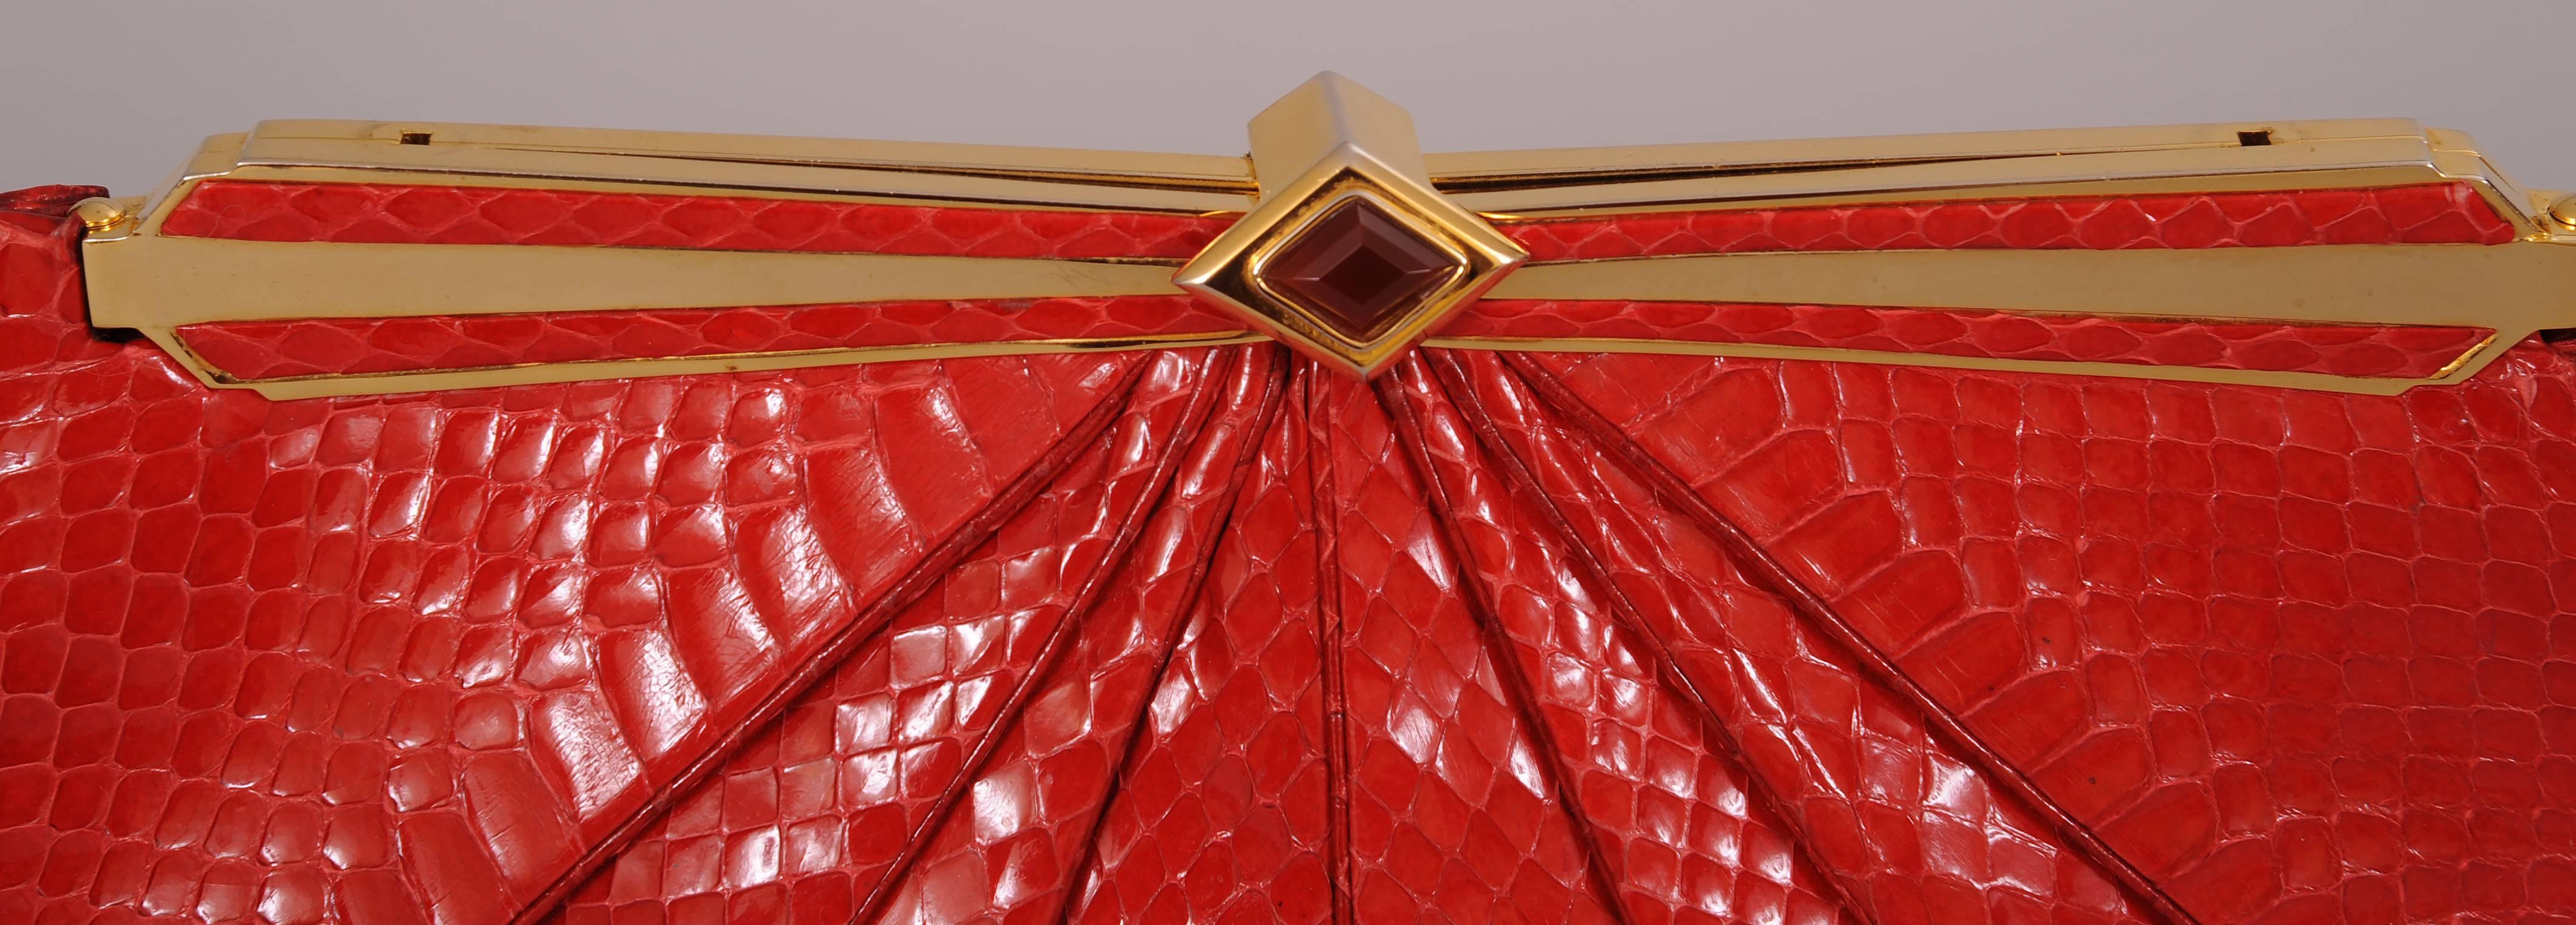 A tailored bag made form Bright red snakeskin is pleated on the front and back. The hinged frame is gold toned metal and red snakeskin with a faceted stone clasp. The bag has a gold toned chain strap tucked inside. The red satin lining is in perfect